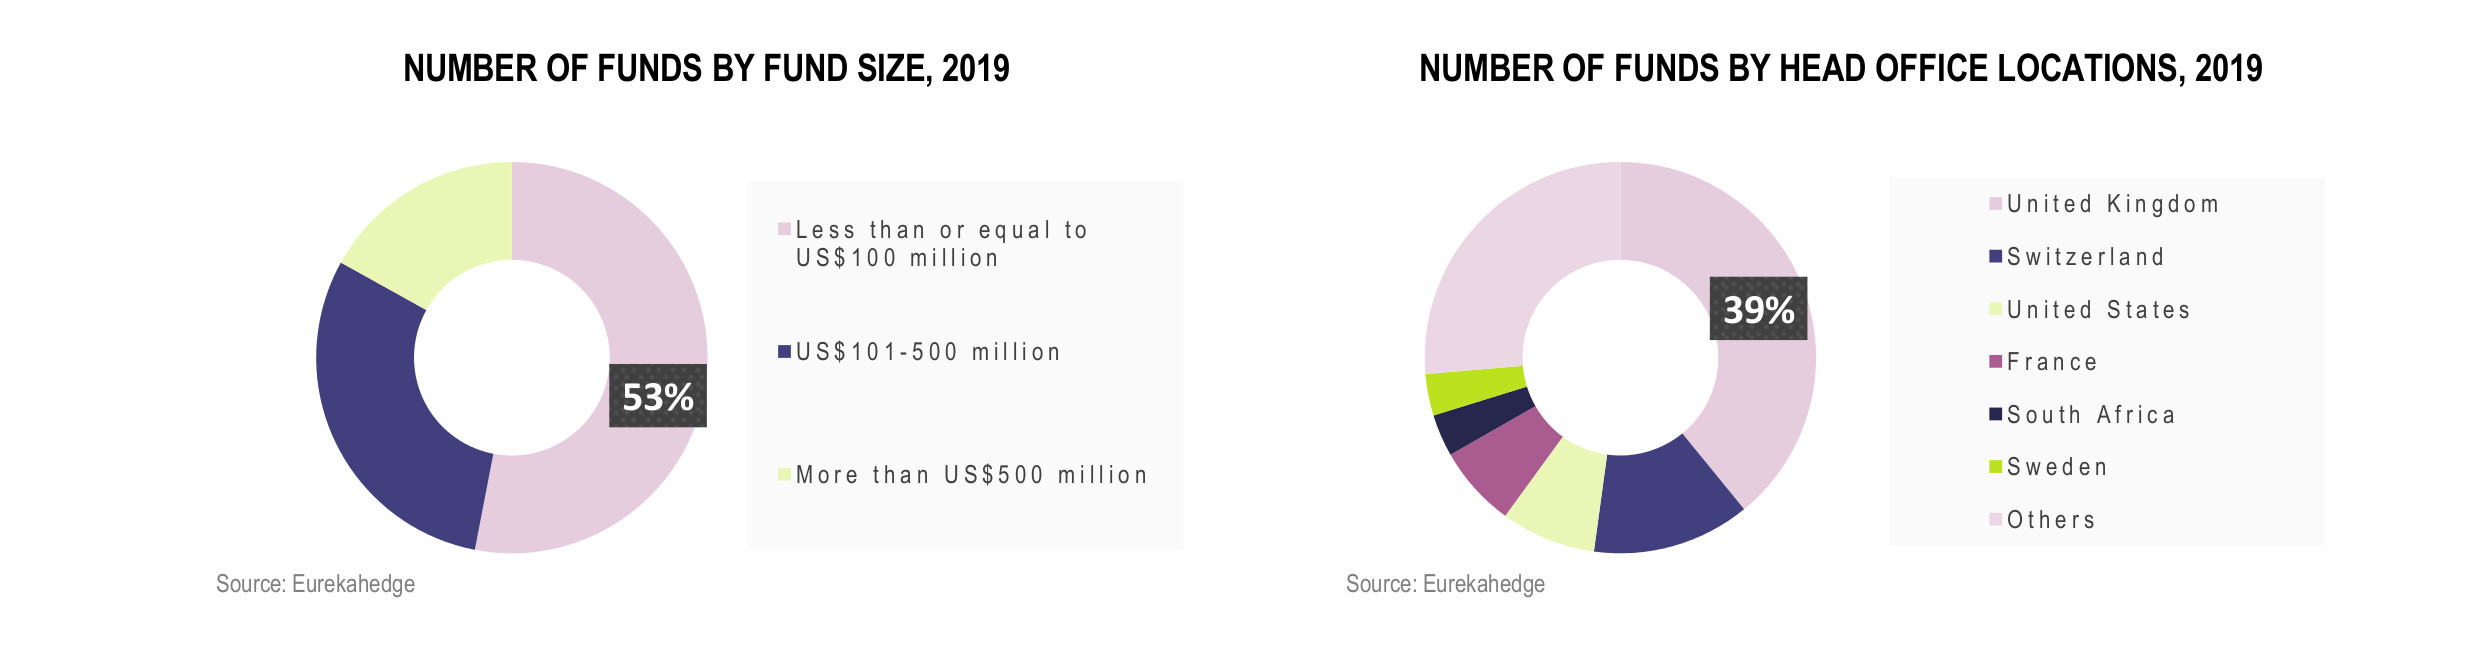 European Hedge Funds Infographic December 2019 - funds by fund size and head office location